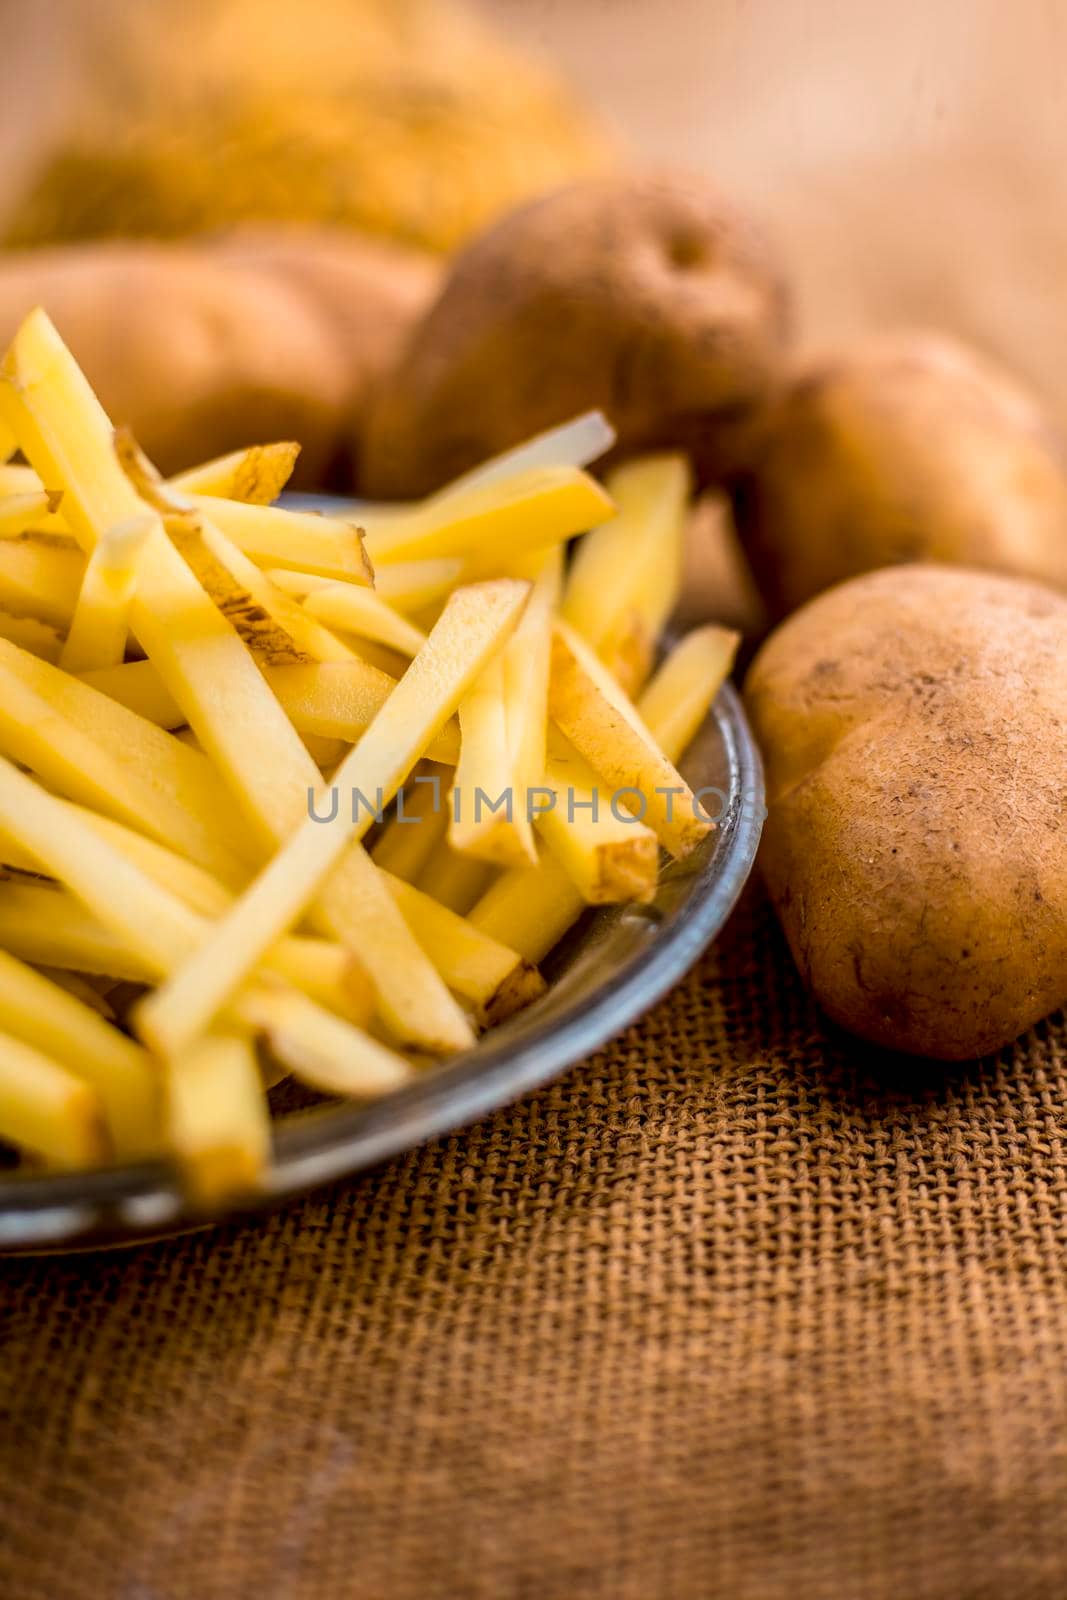 Raw cut french fries in a transparent glass plate along with raw potato with it on jute bag's surface. by mirzamlk